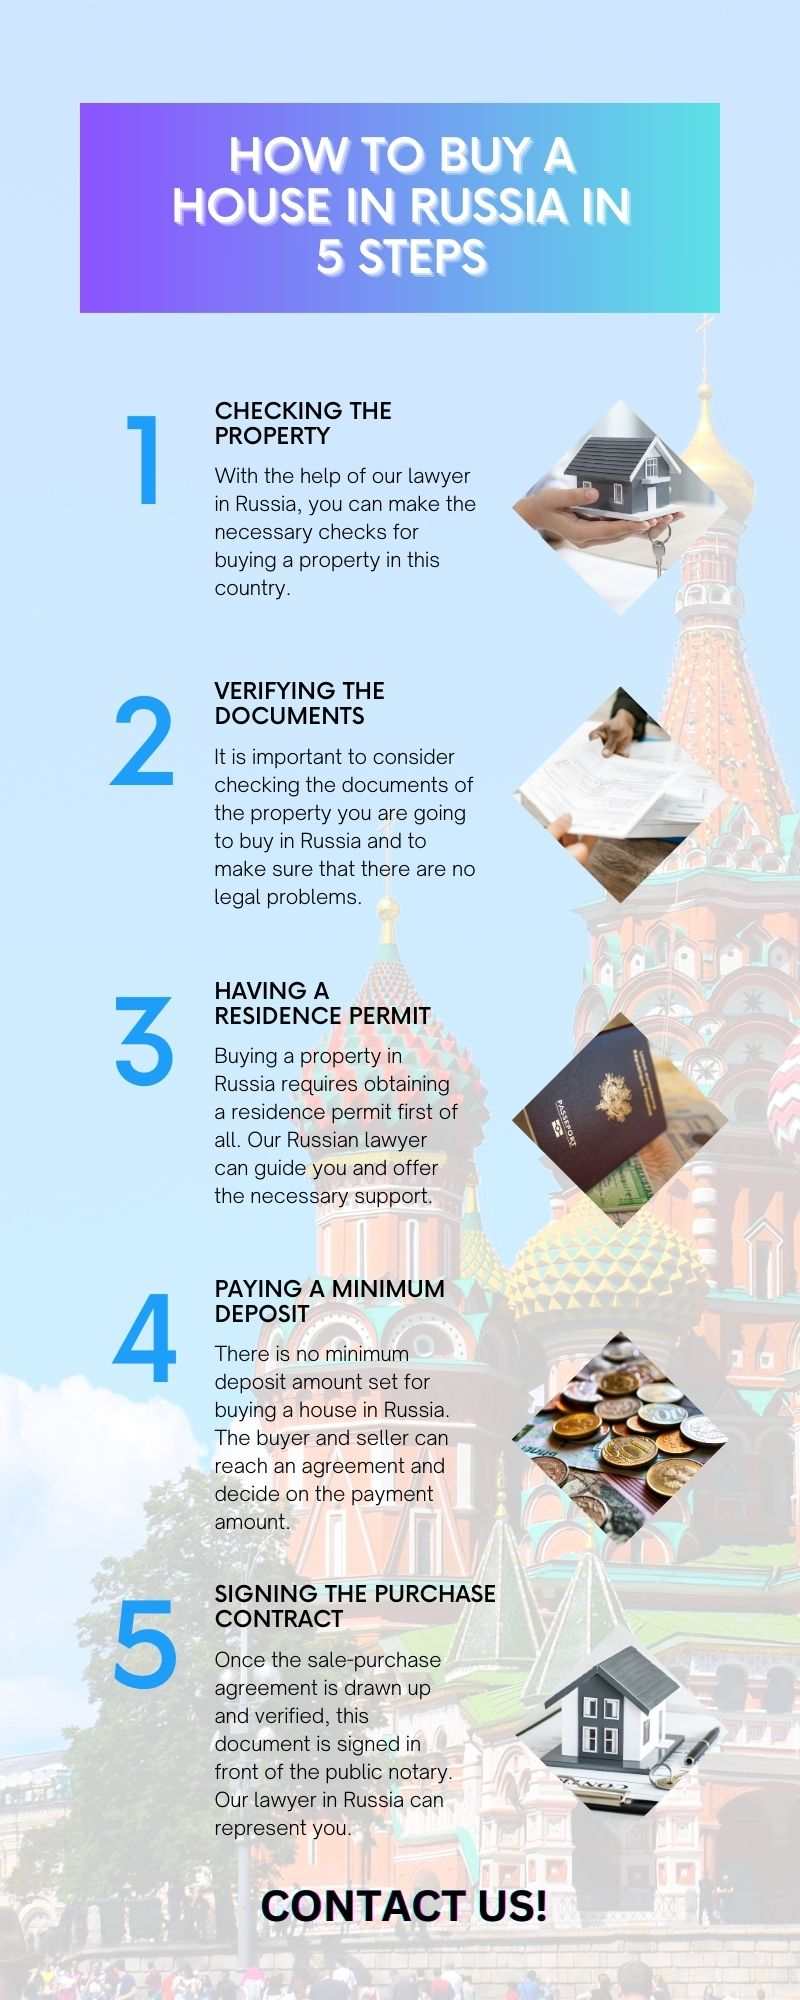 How to buy a house in Russia in 5 steps